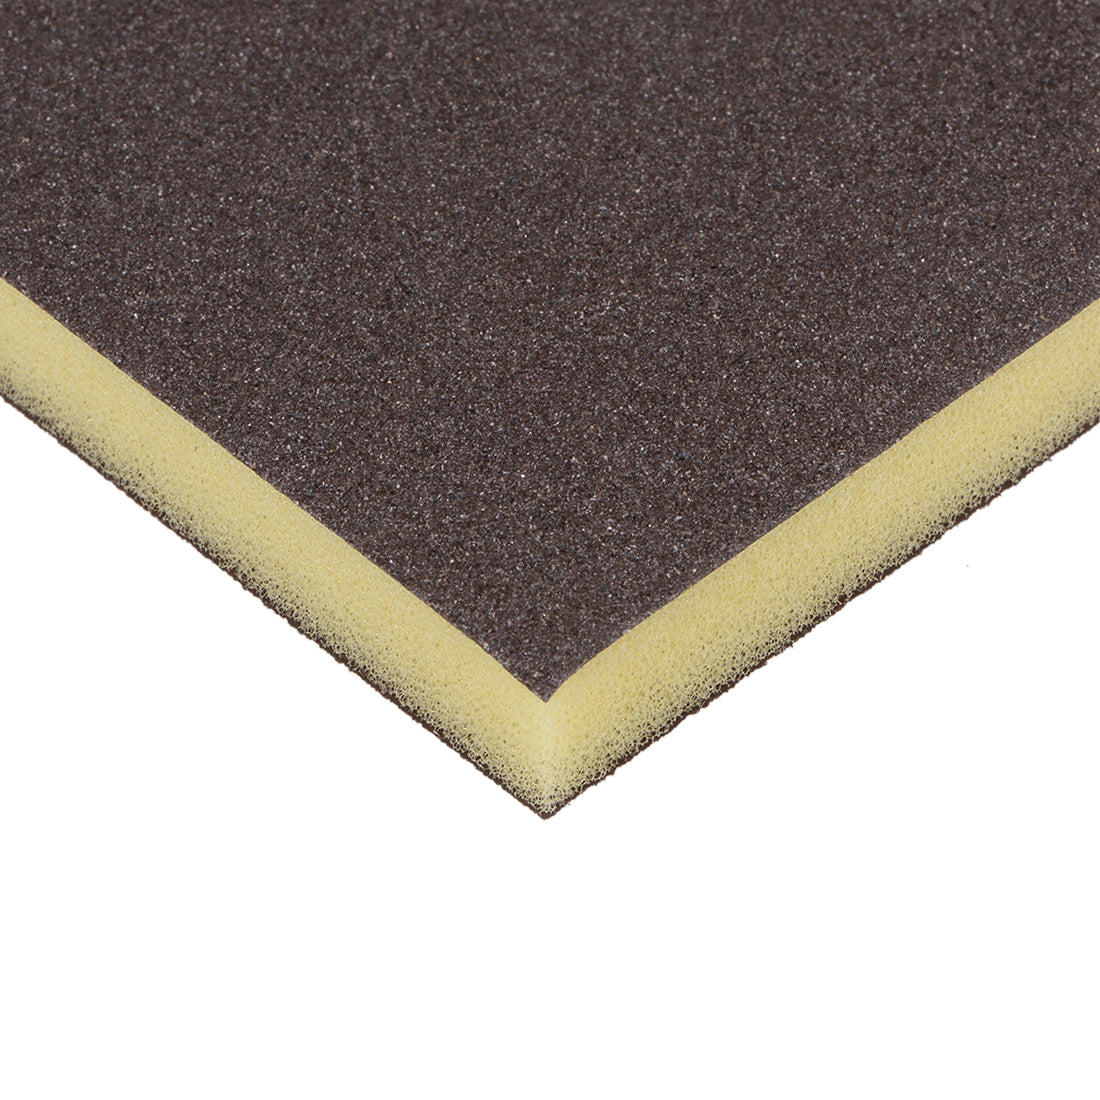 uxcell Uxcell Sanding Sponge 150 Grit Sanding Block Pad 4.7inch x 3.9inch x 0.4inch Brown 3pcs